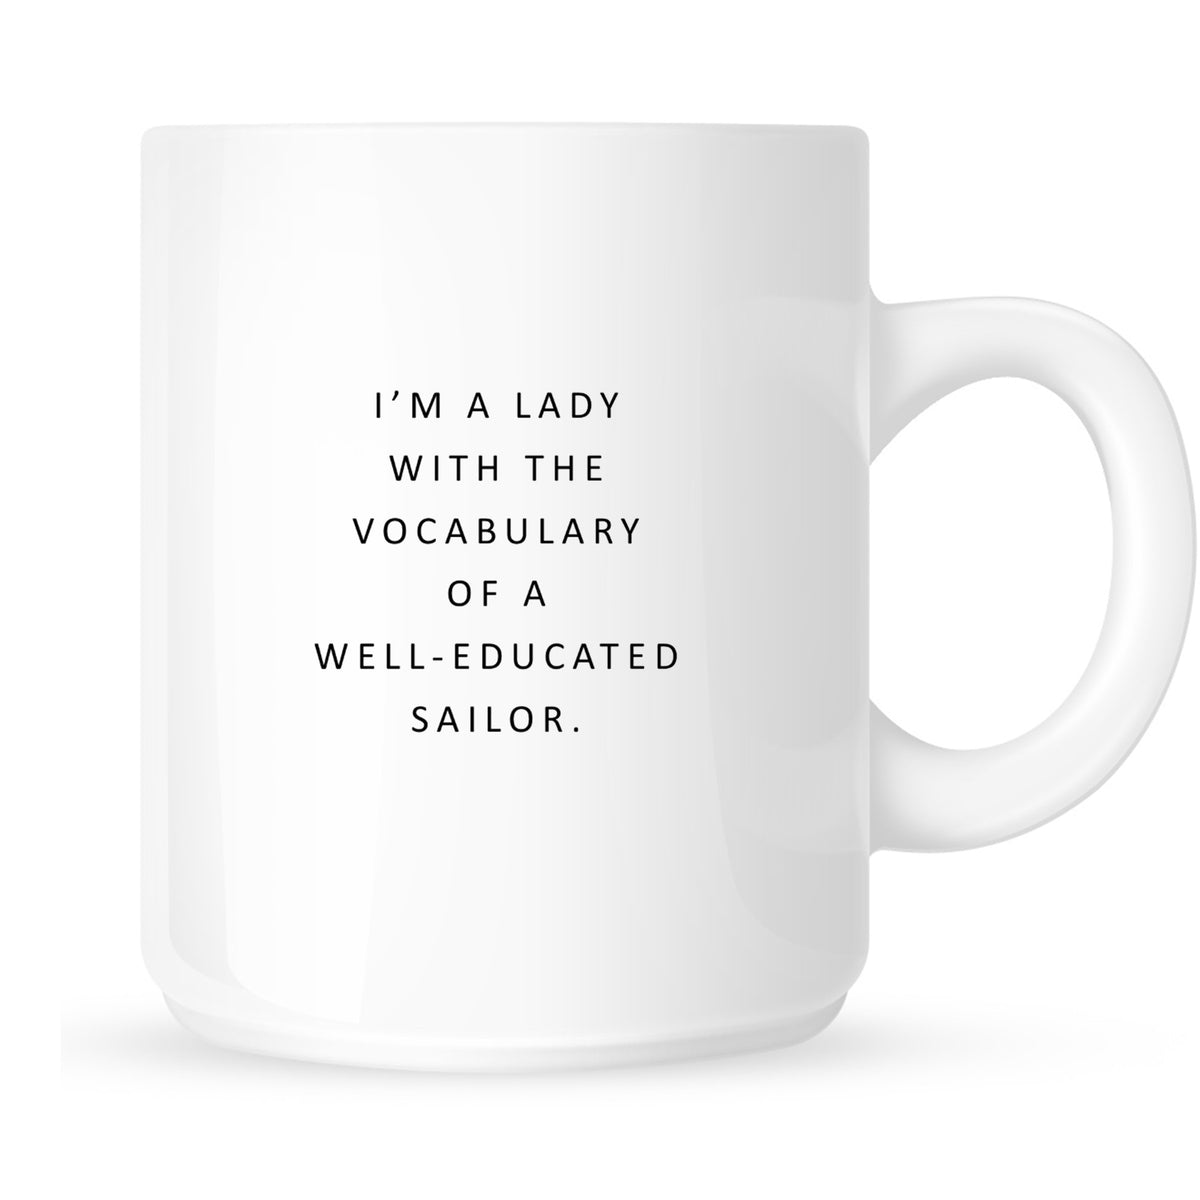 Mug - I'm a Lady With the Vocabulary of a Well-Educated Sailor